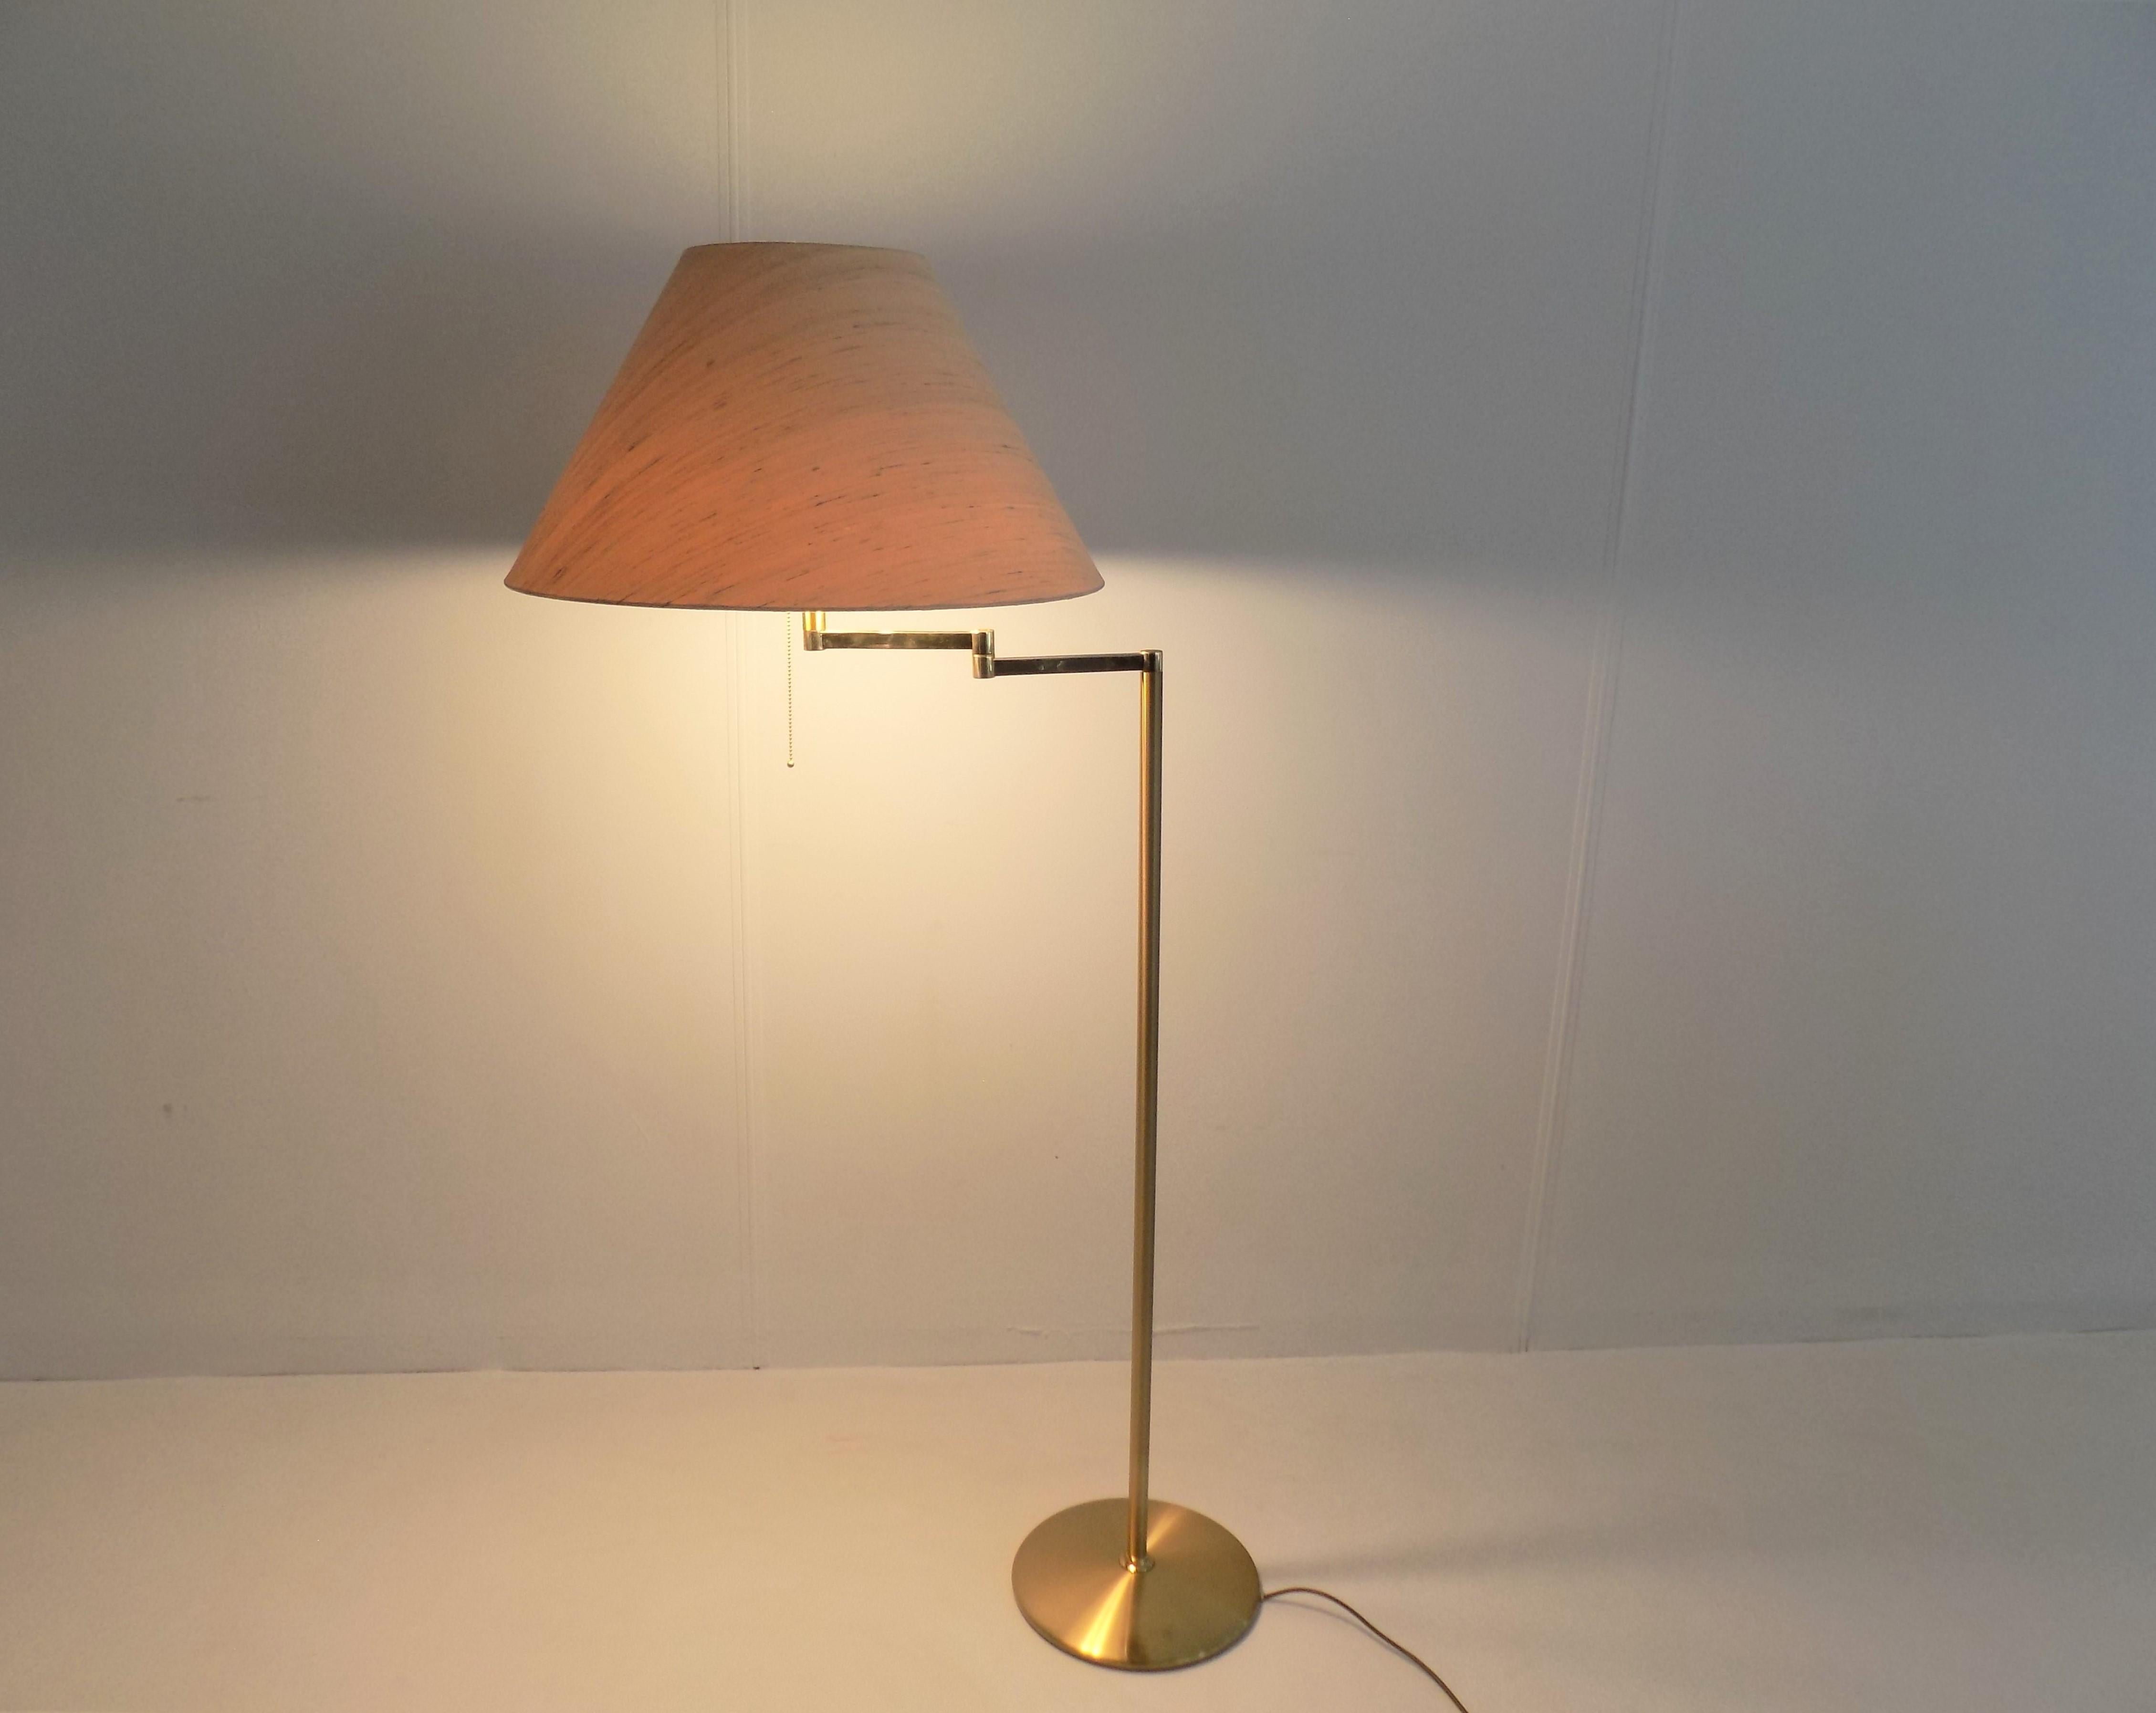 This large brass floor lamp is in good condition. The brass base shows slight signs of wear, the natural-colored lampshade with a mottled linen structure is impeccable. The lamp can be used variably via the swivel arm and has 3 light points in the